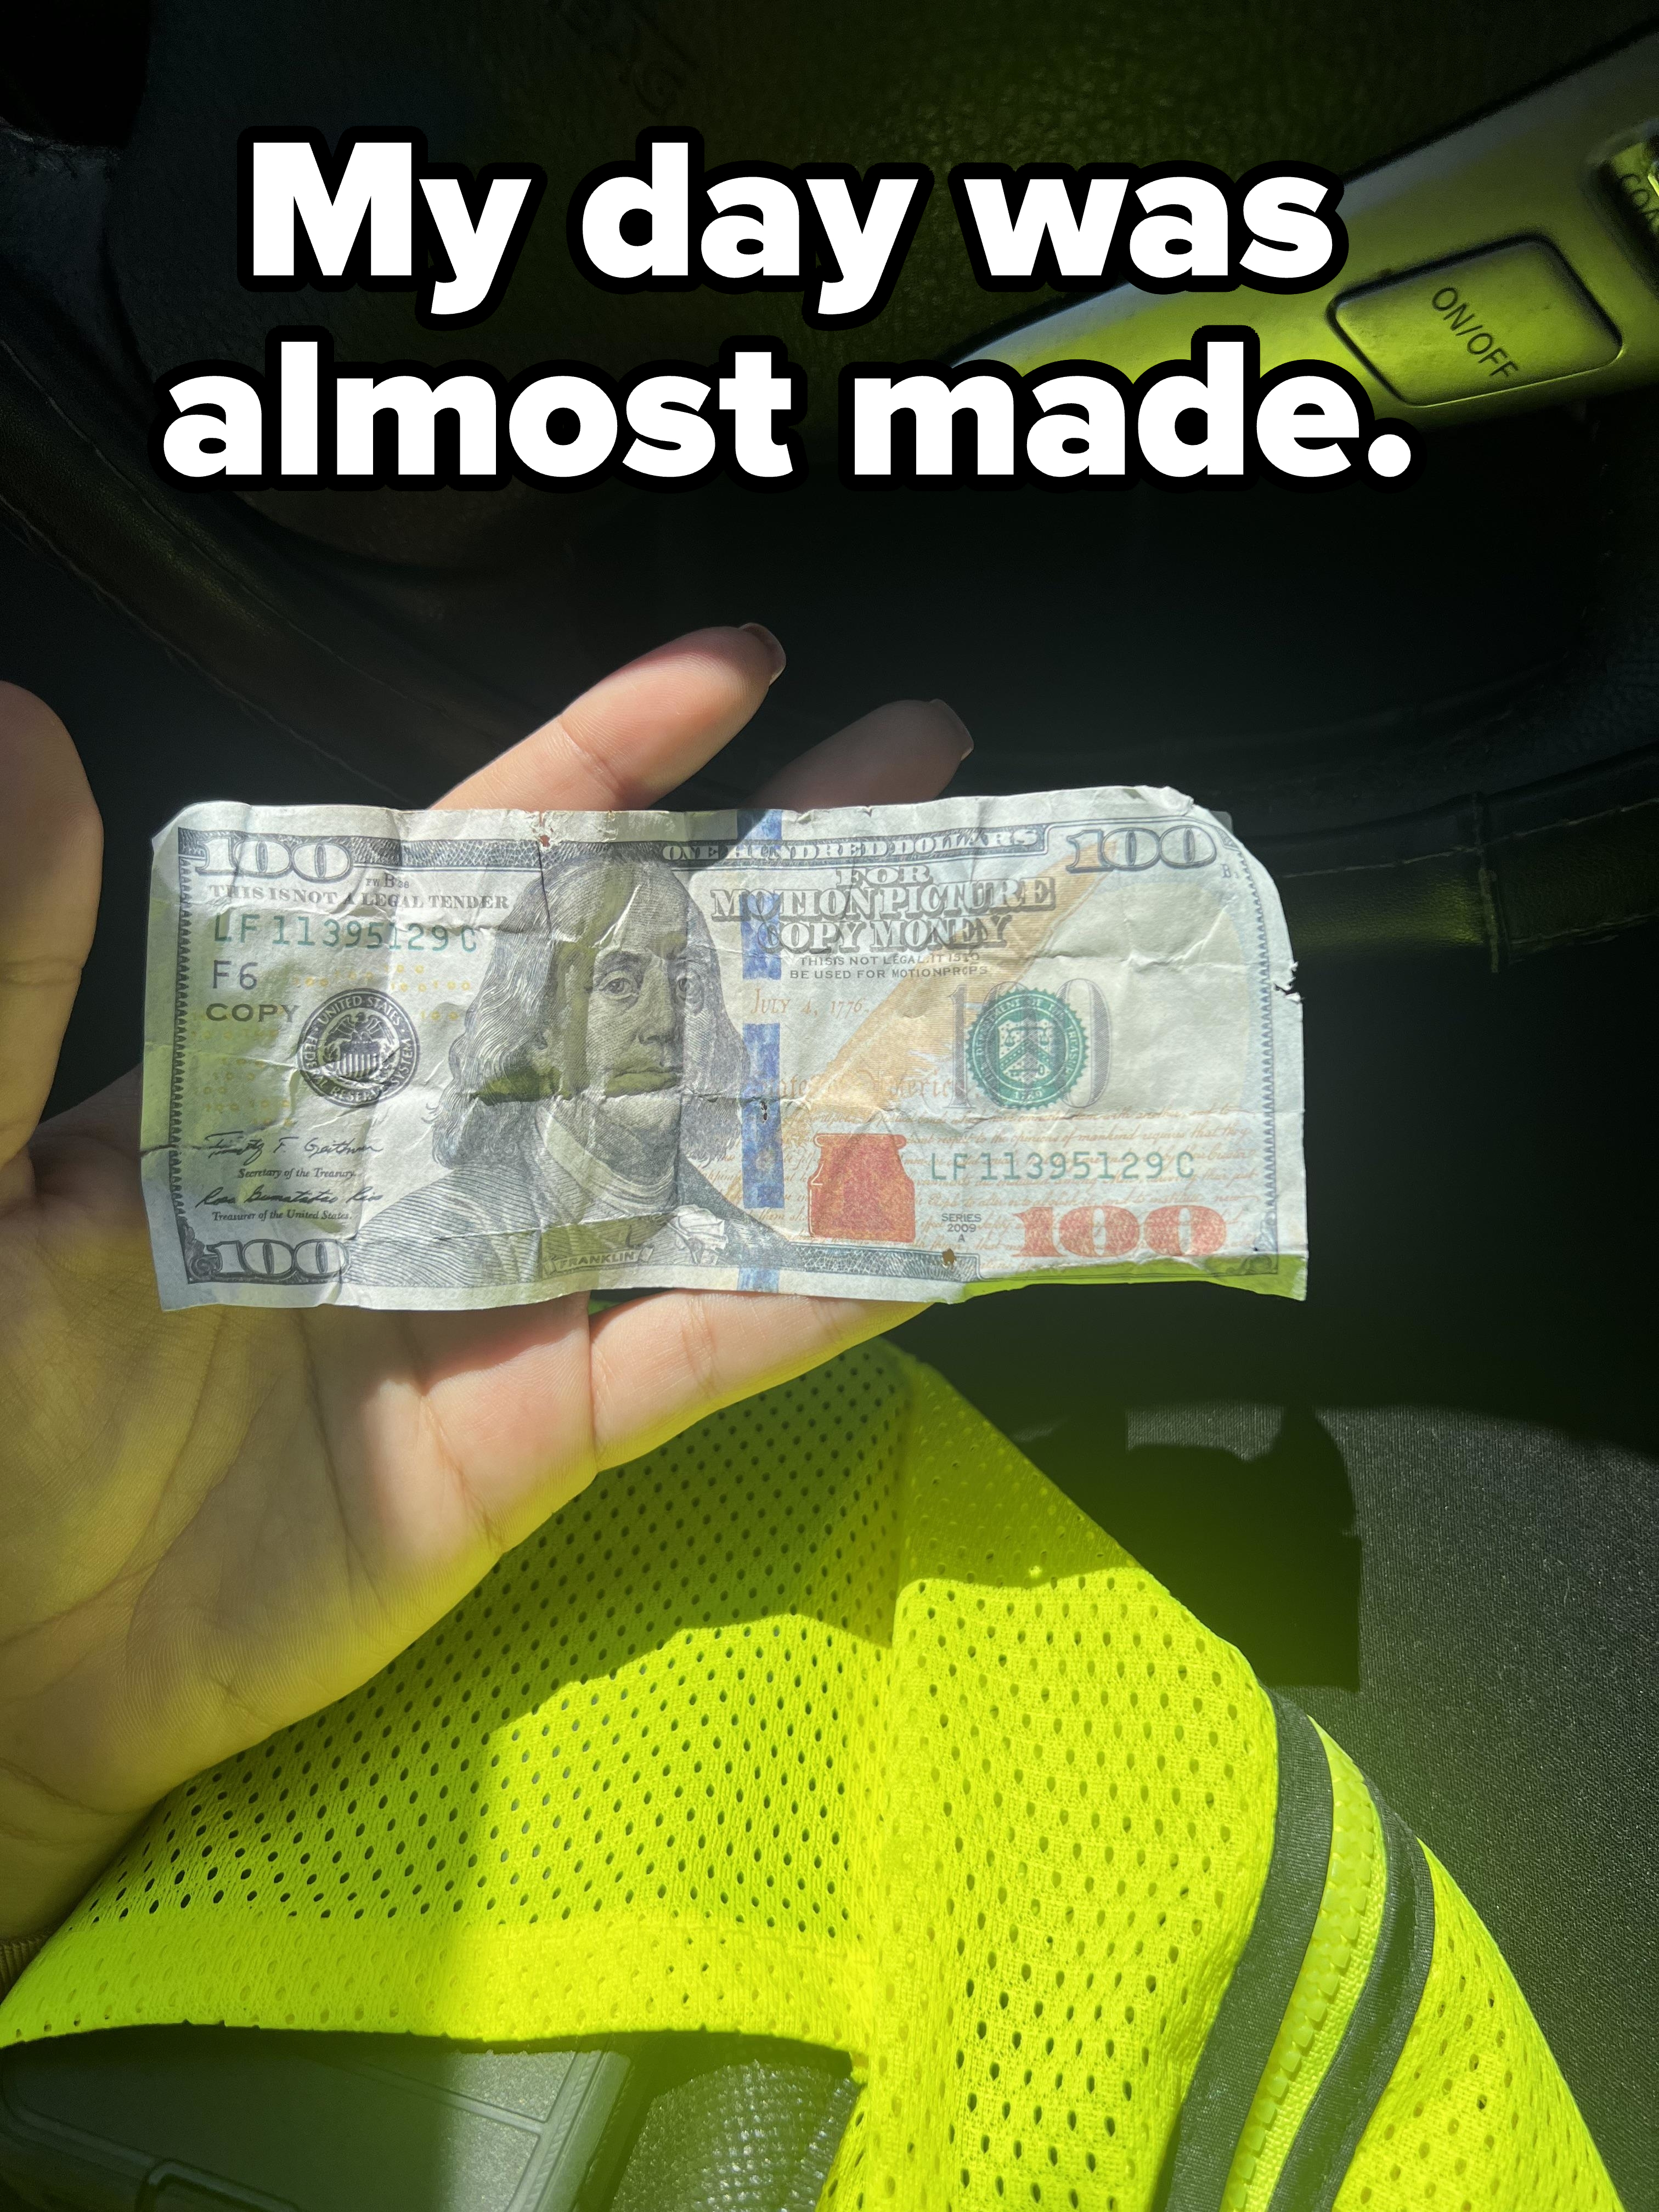 A hand holding a crumpled $100 bill inside a car with part of a yellow high-visibility vest visible underneath